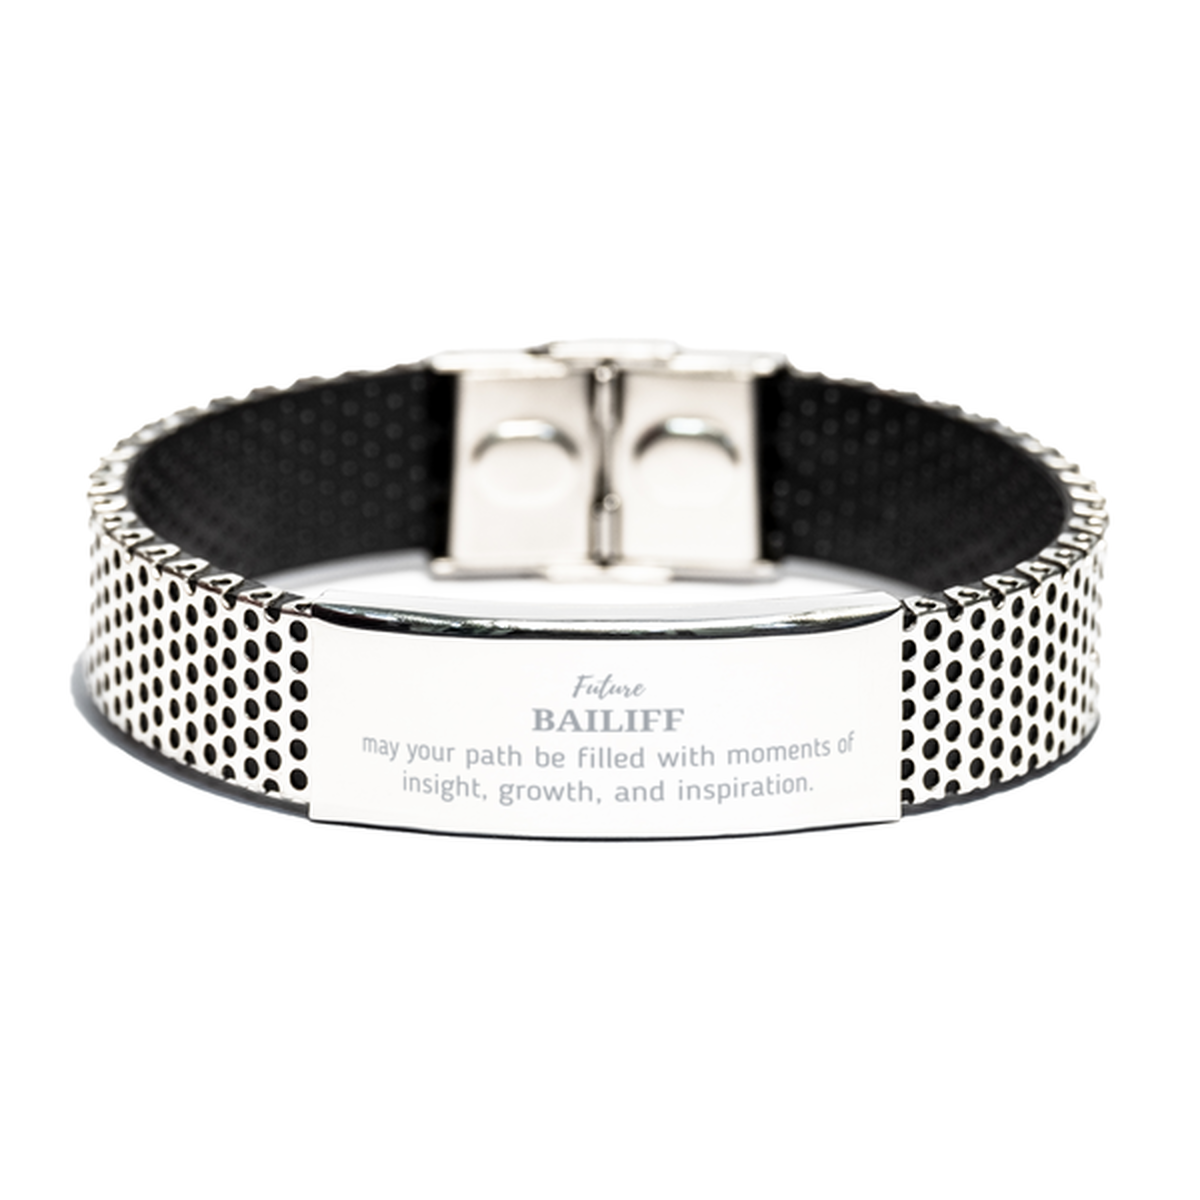 Future Bailiff Gifts, May your path be filled with moments of insight, Graduation Gifts for New Bailiff, Christmas Unique Stainless Steel Bracelet For Men, Women, Friends